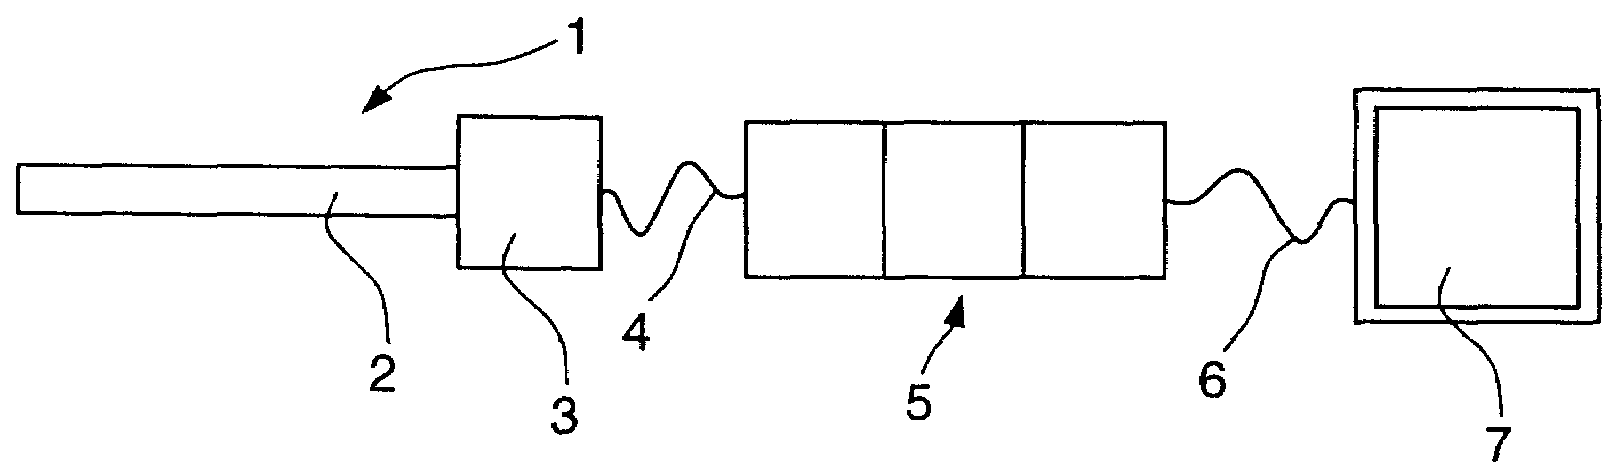 Method and apparatus to process endoscope images